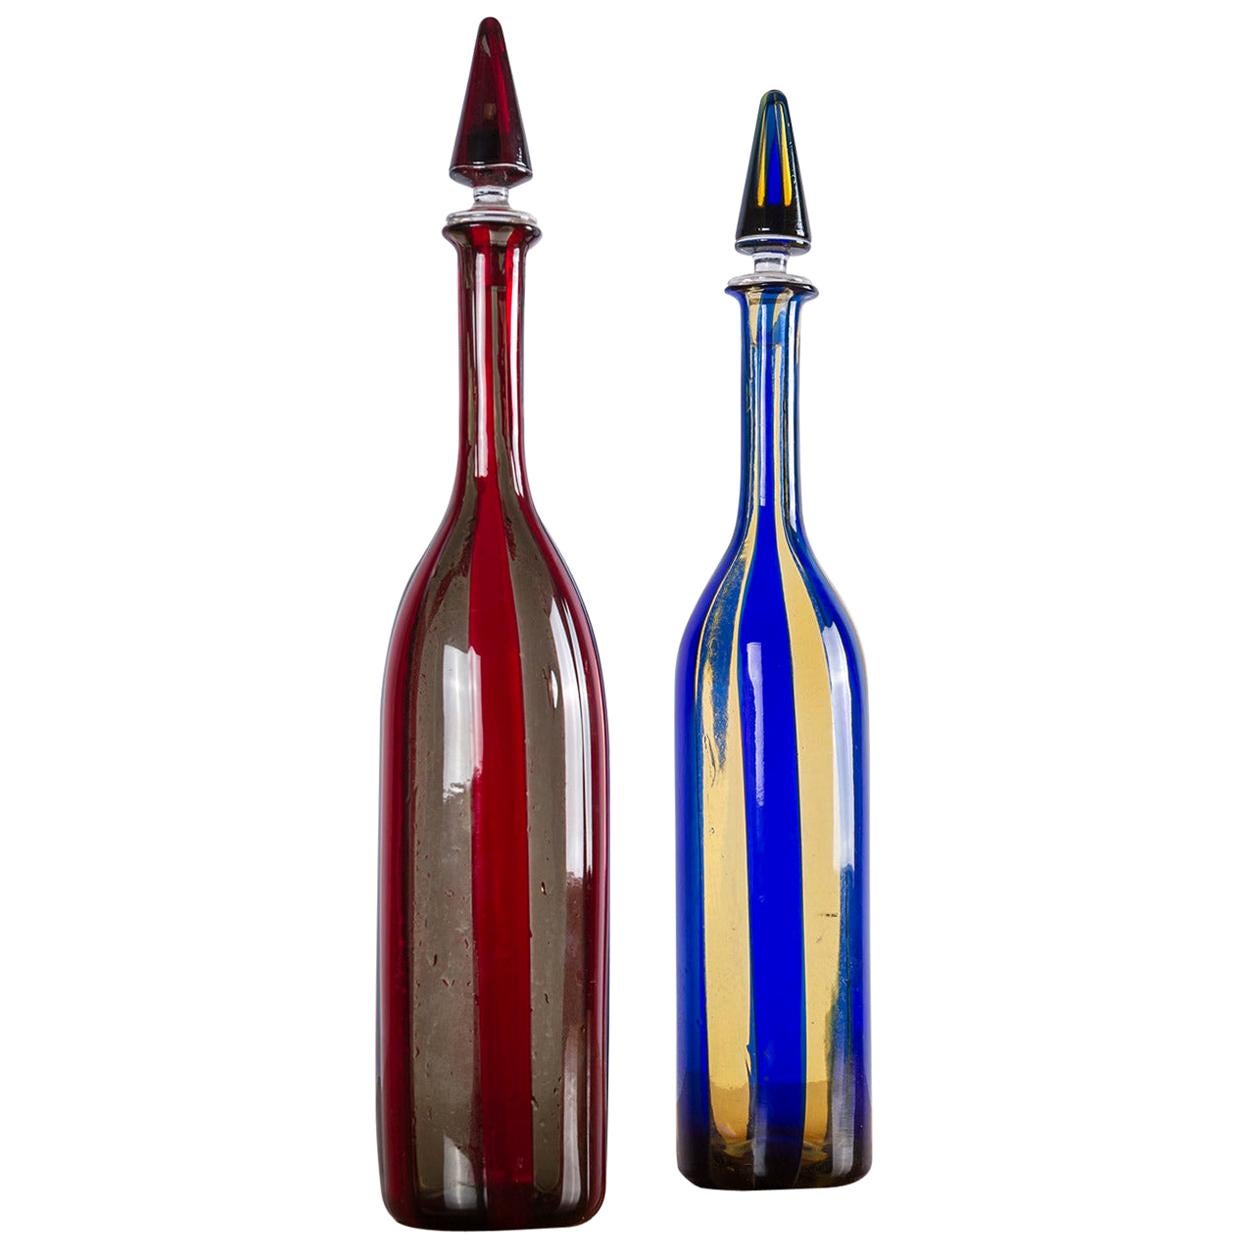 Rare Set of Two Murano Glass Bottles by Fulvio Bianconi and Paolo Venini, 1950s For Sale